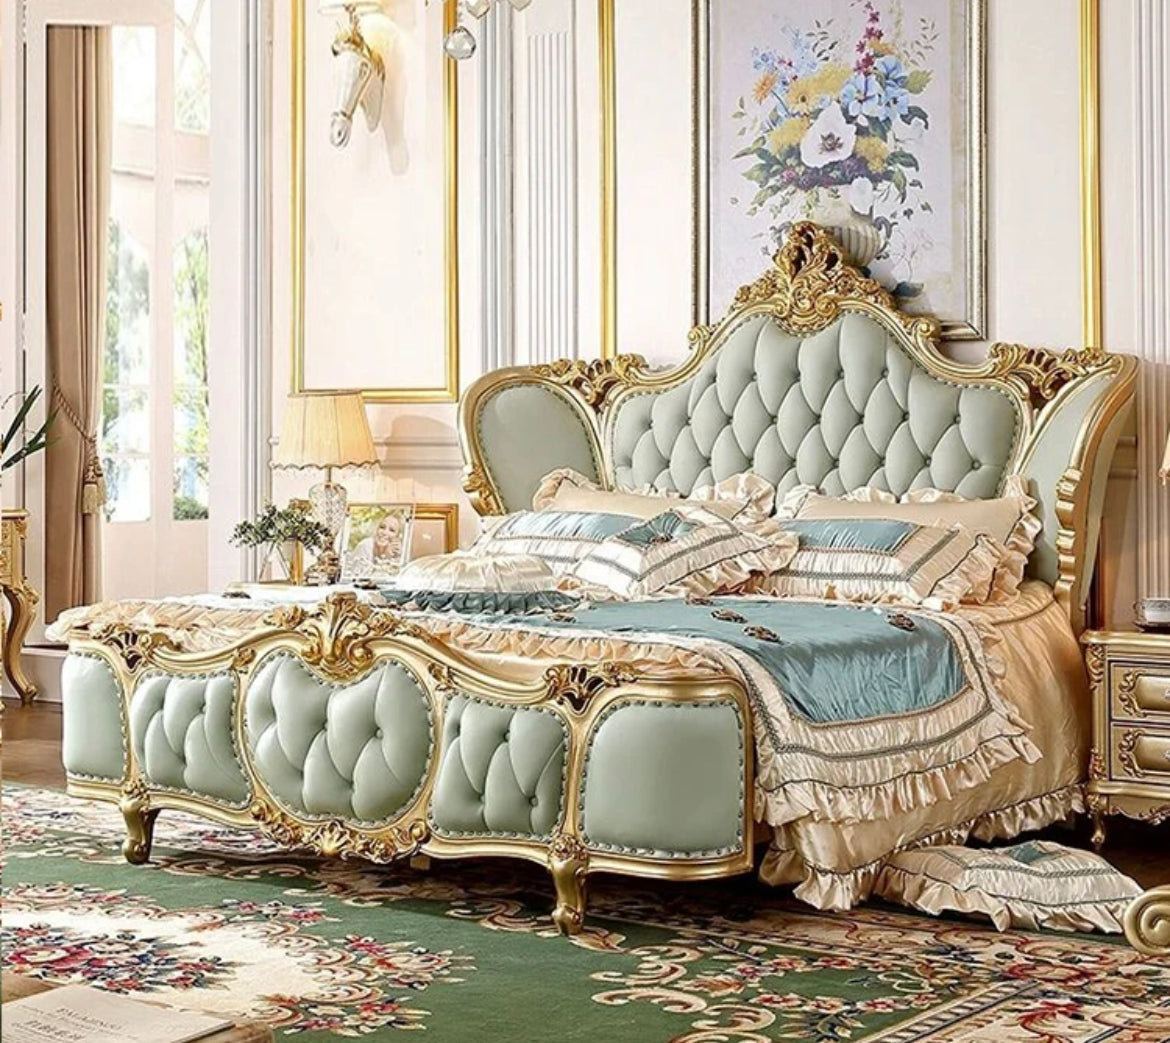 Queen Size Bed High Gloss Champagne Foil Luxury Home Furniture Barowue Design Bedroom Furniture